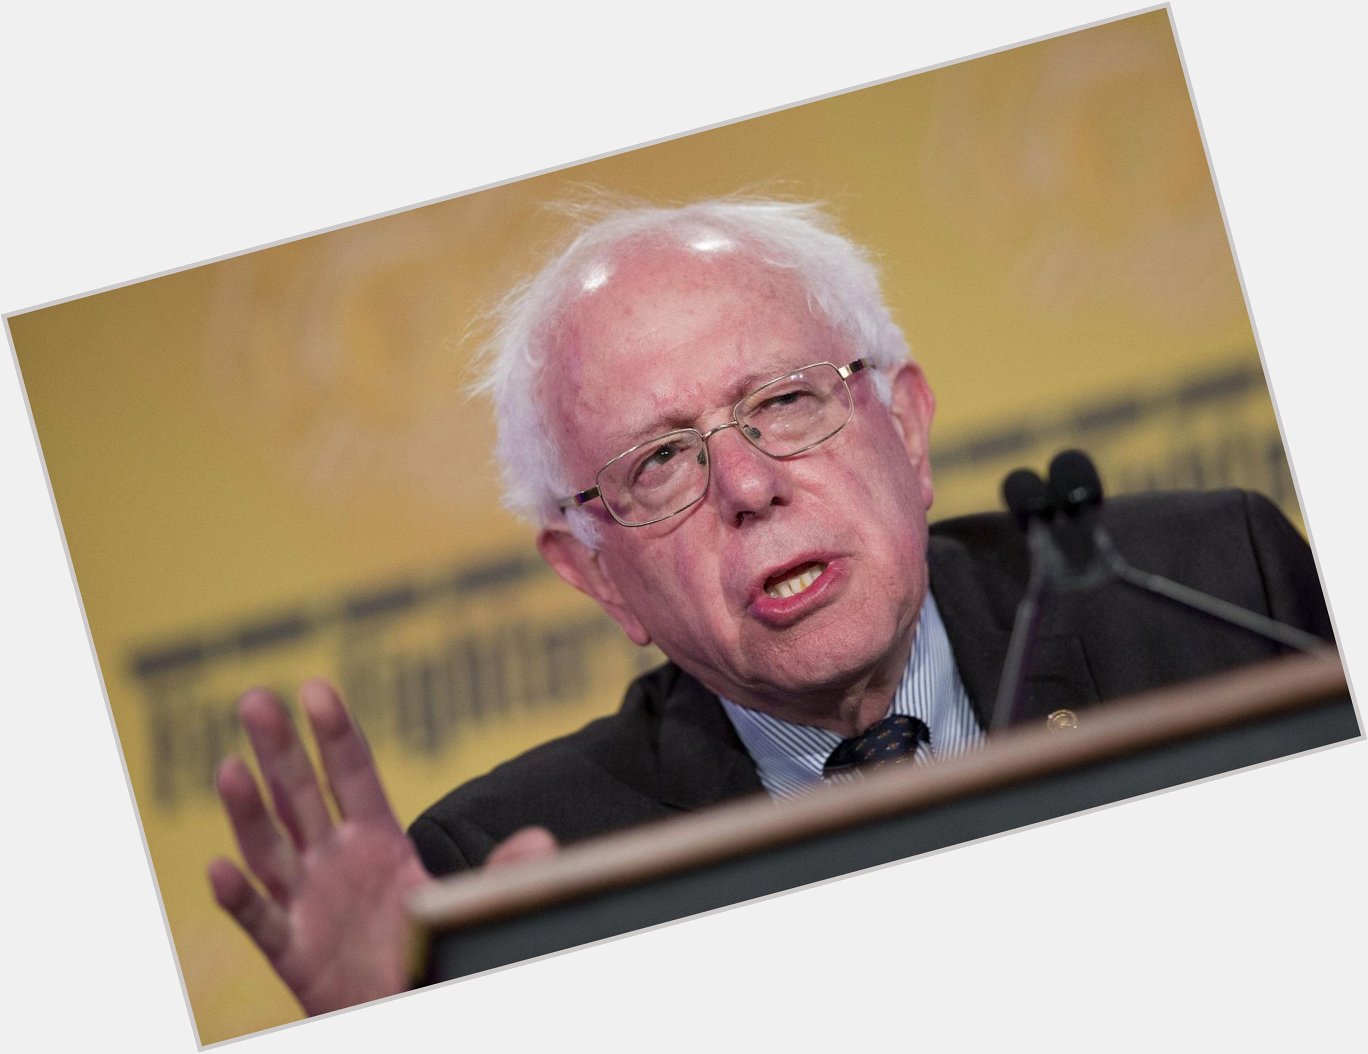 Happy Birthday to Bernie Sanders who just turned 187 years old this month:  